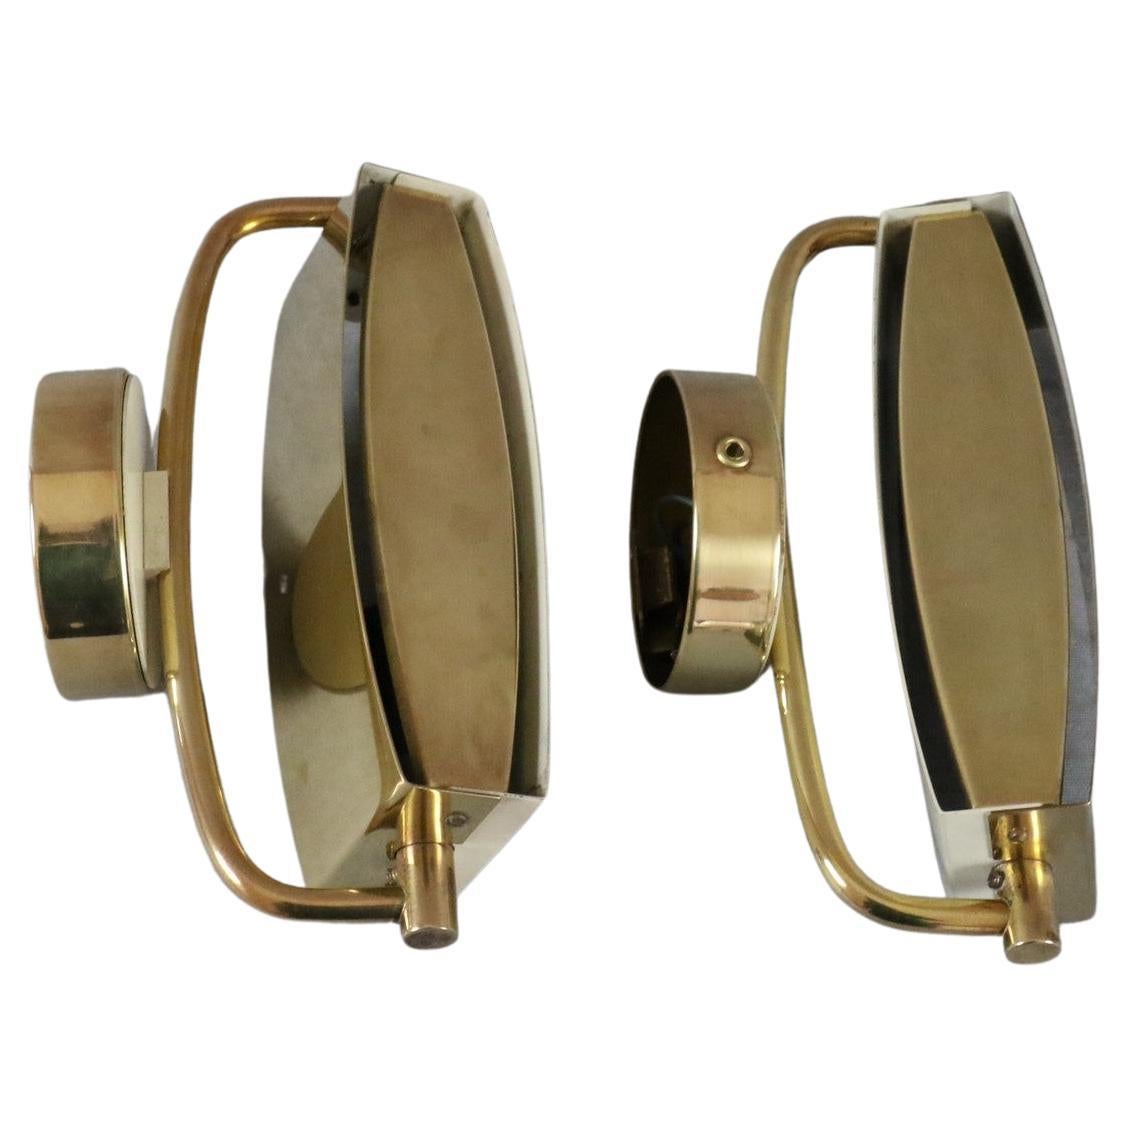 Rare Jacques Biny - pair of mid-century sconces circa 1950 Era Perriand, Guariche

Wonderful French bedside lamps by Jacques Biny, shade and backplate in brass & enameled metal, adjustable along the horizontal brass axis, brushed brass front plate.